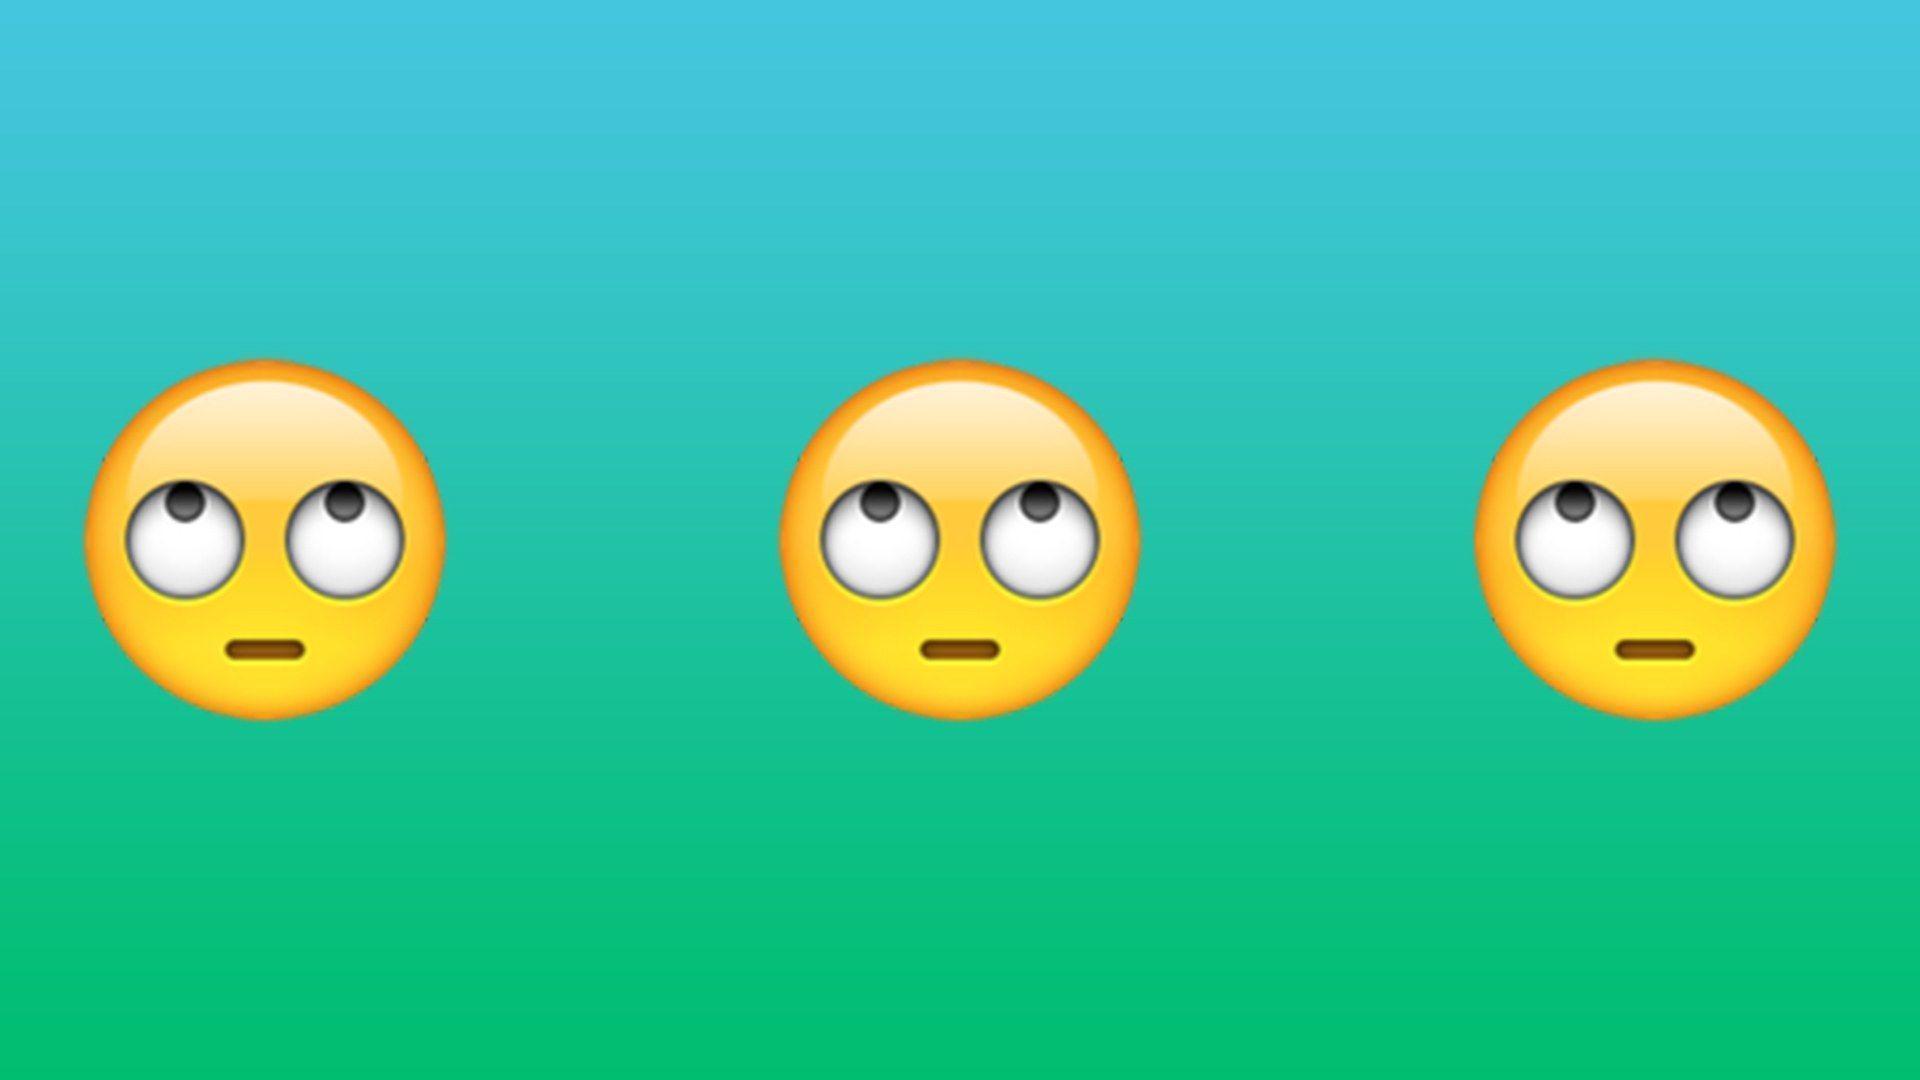 Surprised Face Emoji Wallpaper Android, Other Wallpaper